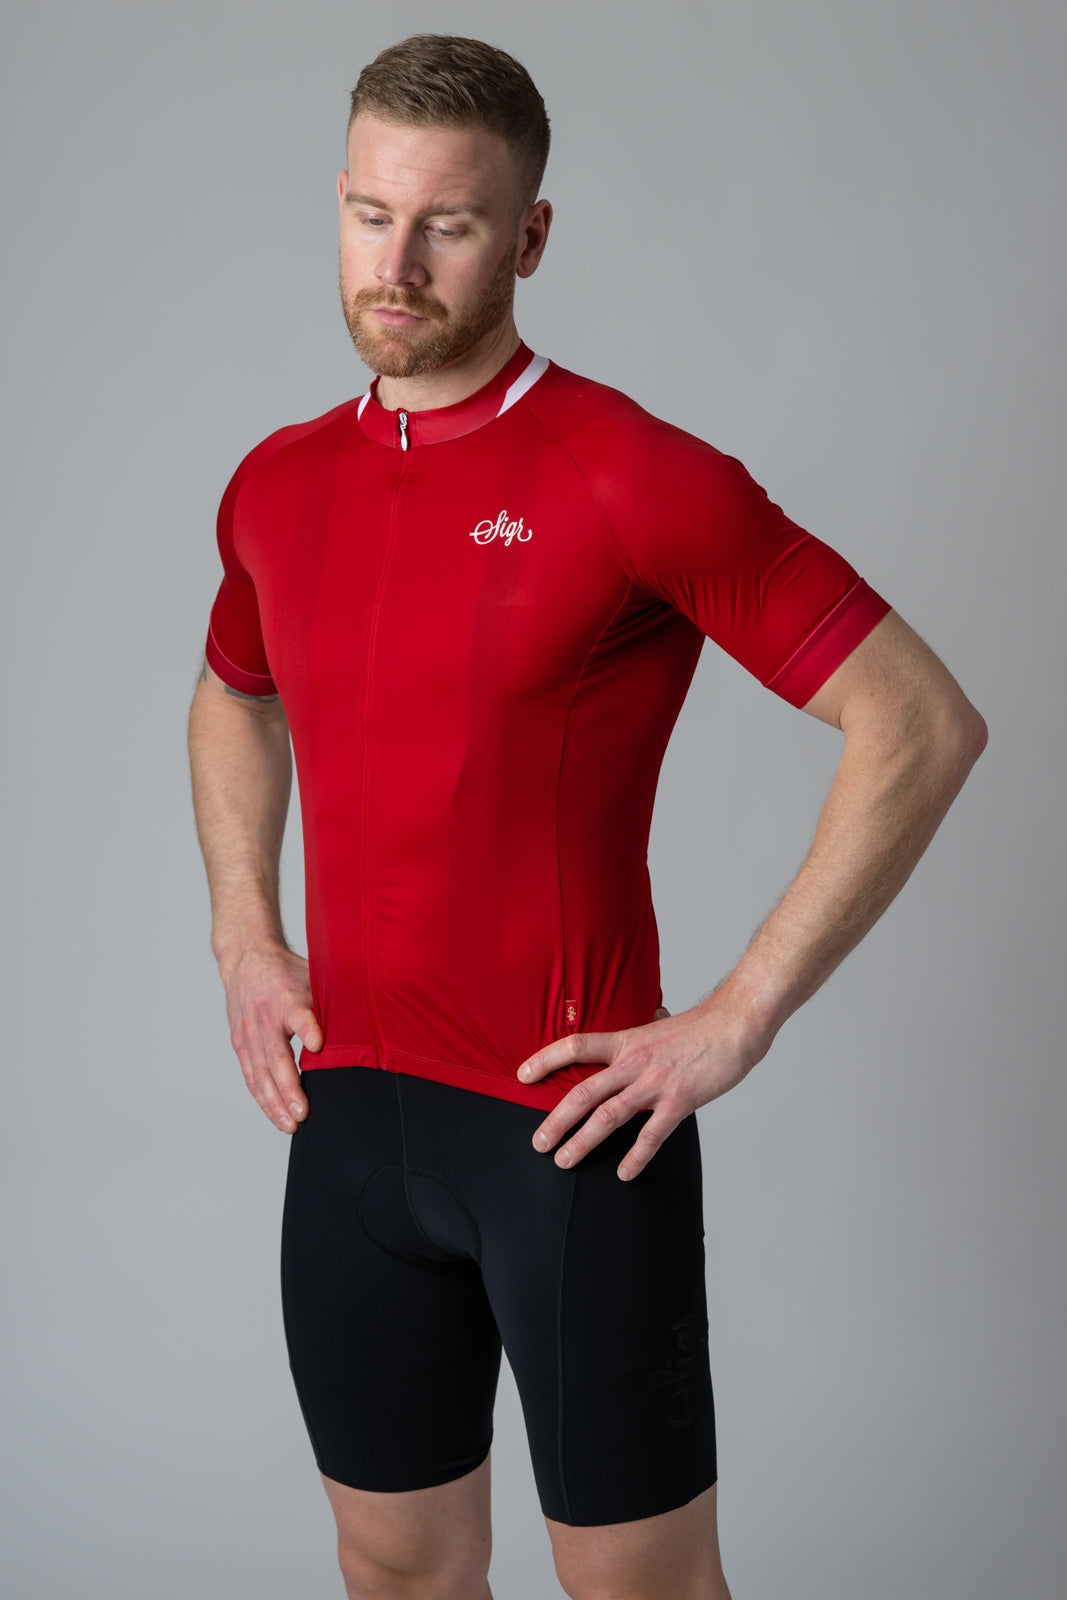 Nejlika - Red Road Cycling Jersey for Men